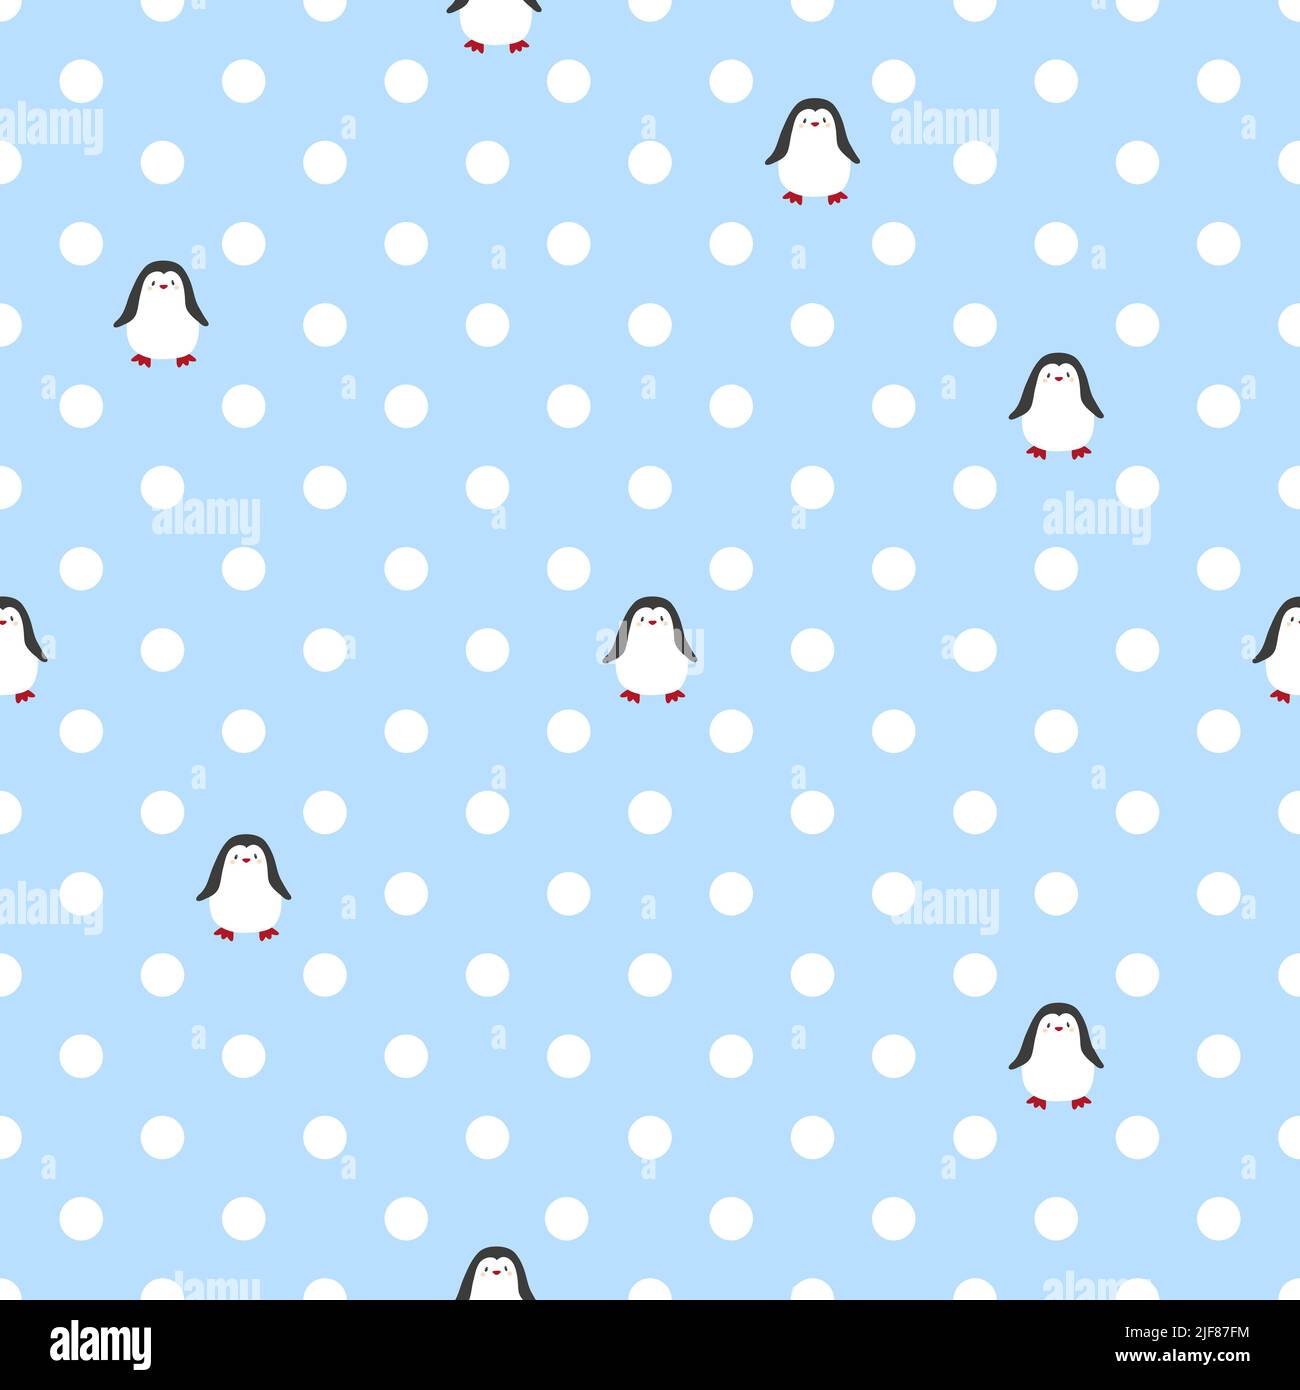 Seamless polka dot pattern with cute little penguins. Baby print. Stock Vector